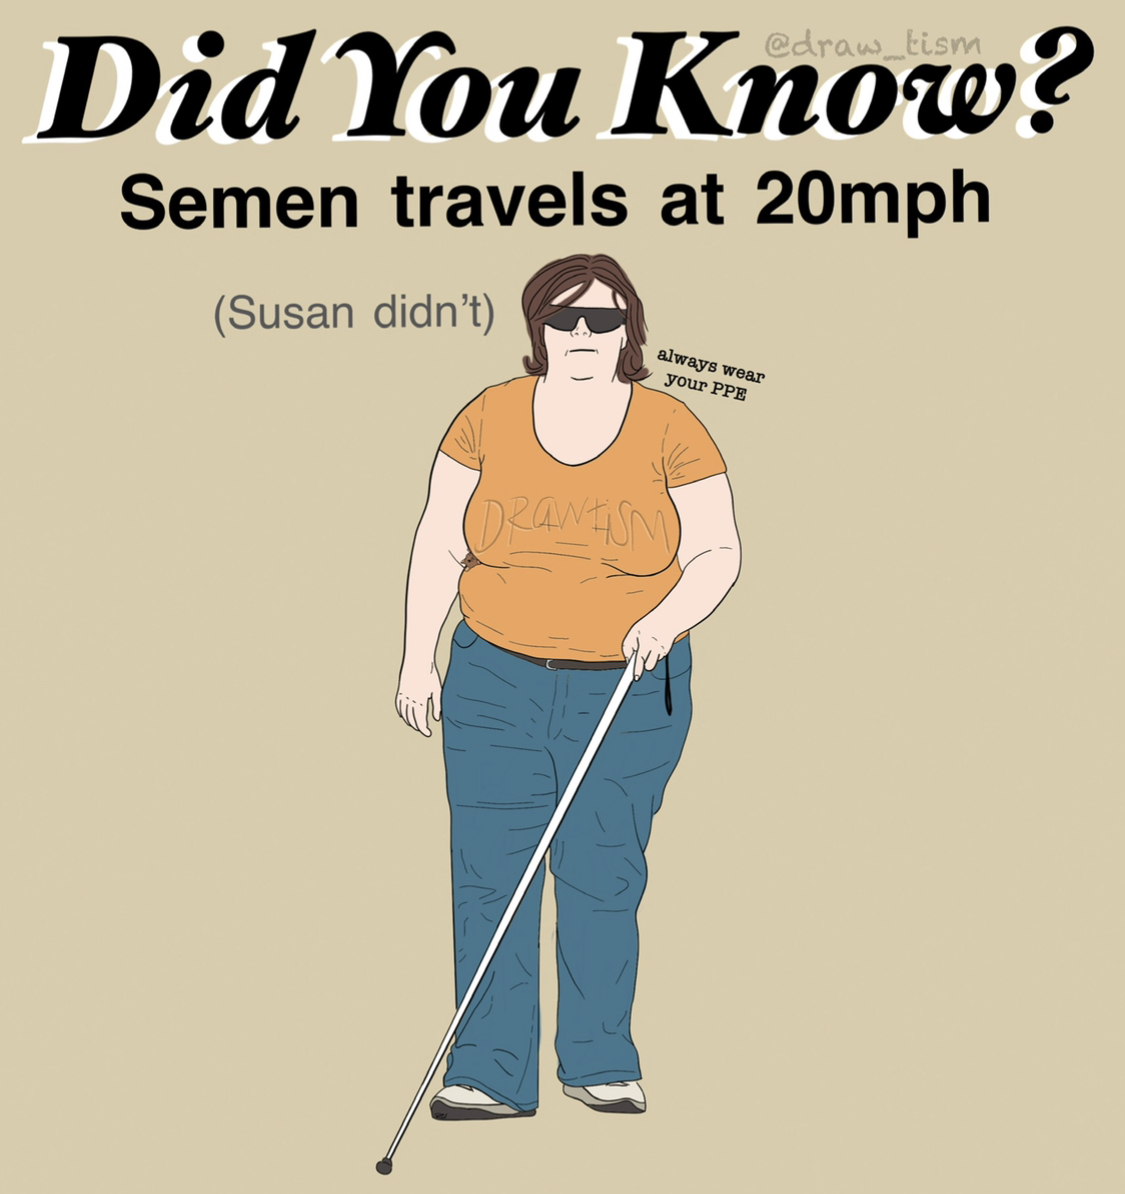 barack obama signature - Did You Know? Semen travels at 20mph Susan didn't was weer your Ppe